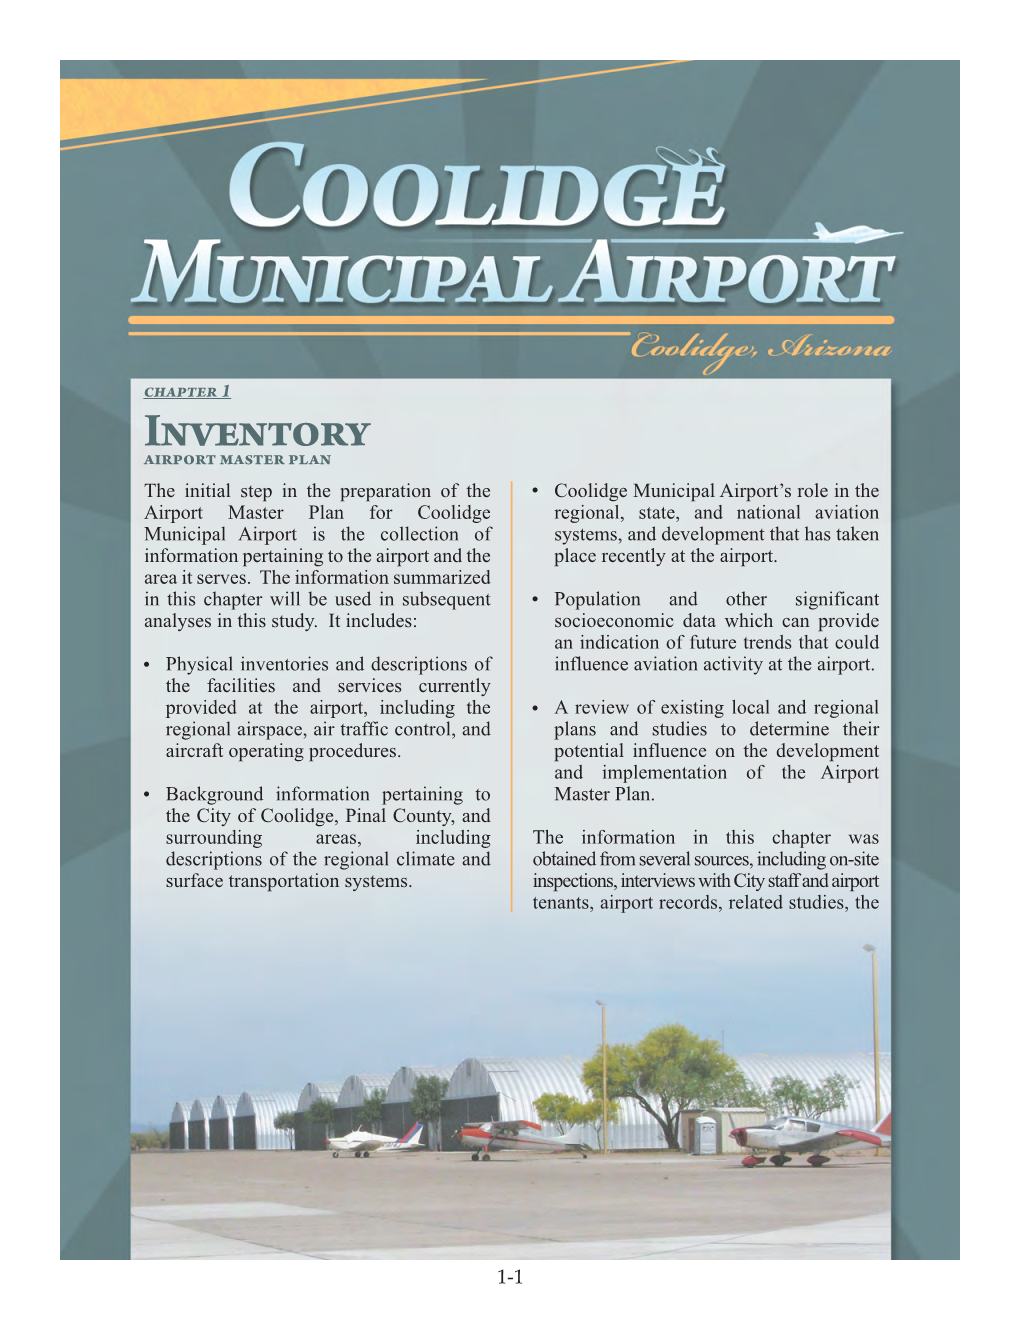 1-1 1 the Initial Step in the Preparation of the Airport Master Plan for Coolidge Municipal Airport Is the Collection of Informa